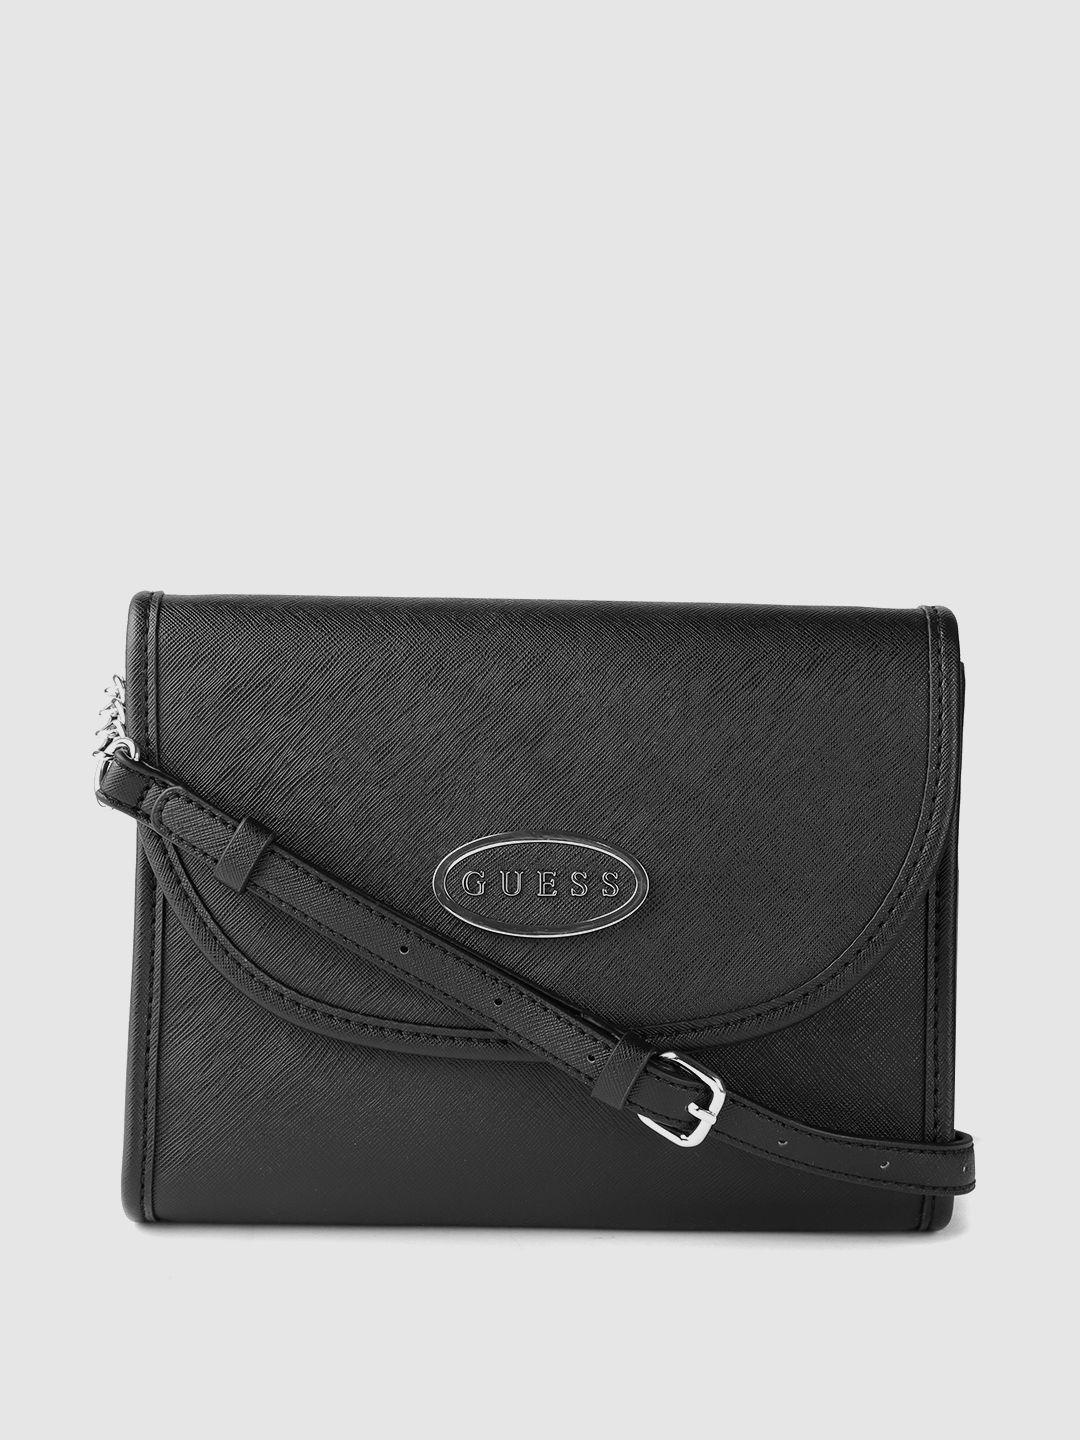 guess women black solid structured sling bag